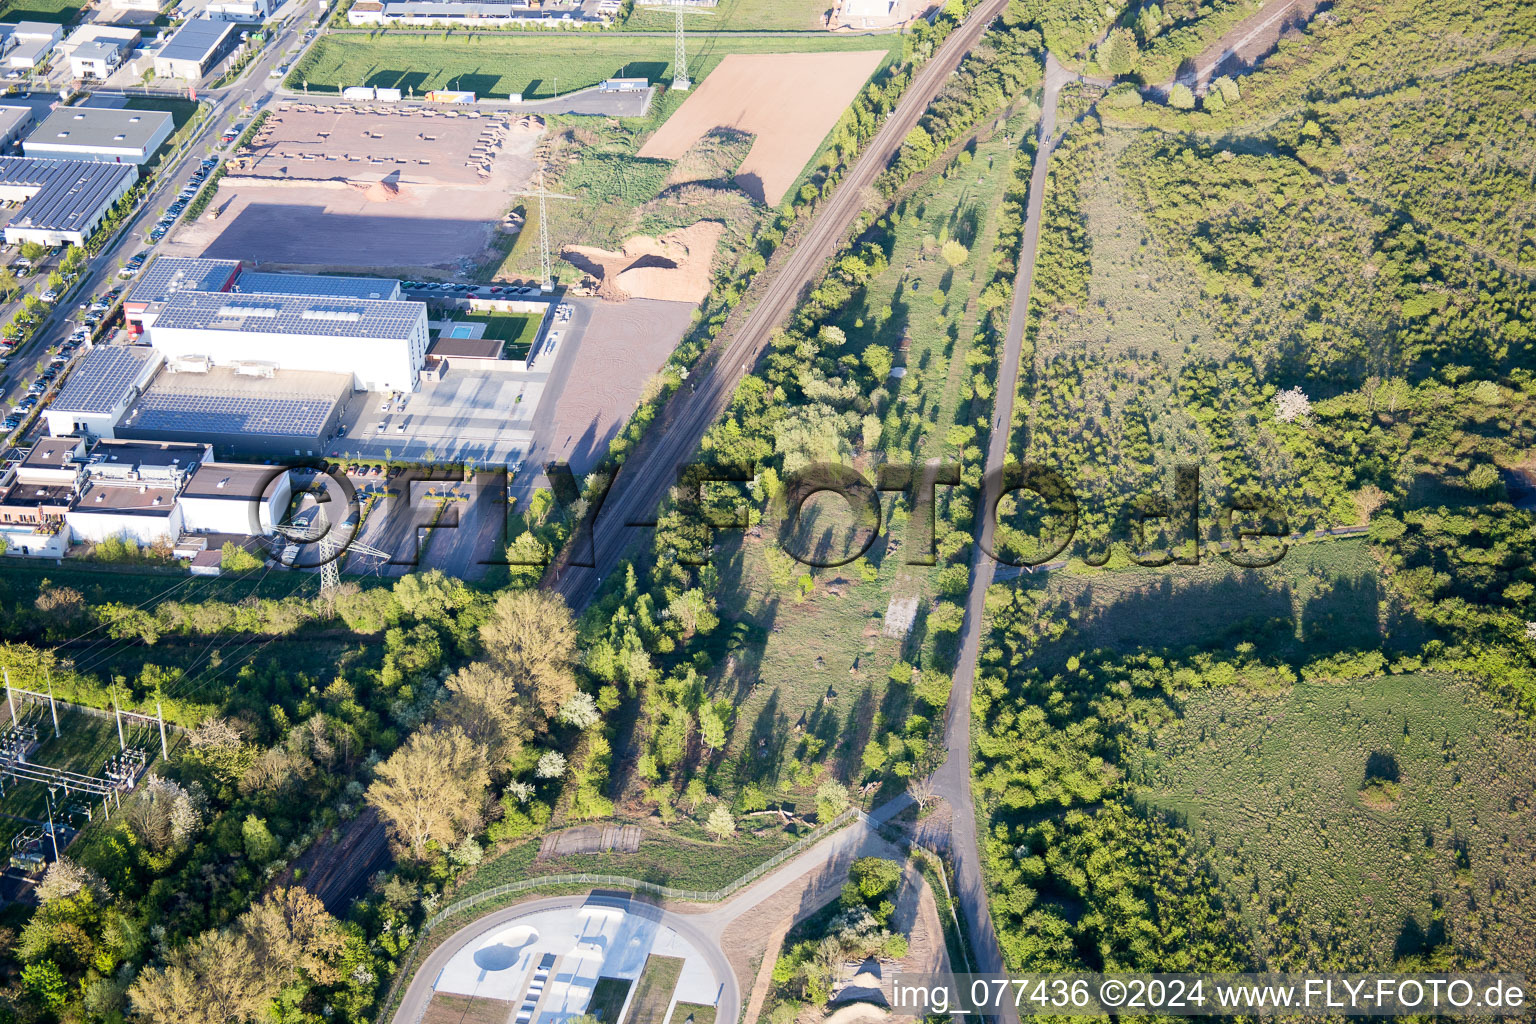 Aerial photograpy of State Garden Show 2015 in Landau in der Pfalz in the state Rhineland-Palatinate, Germany